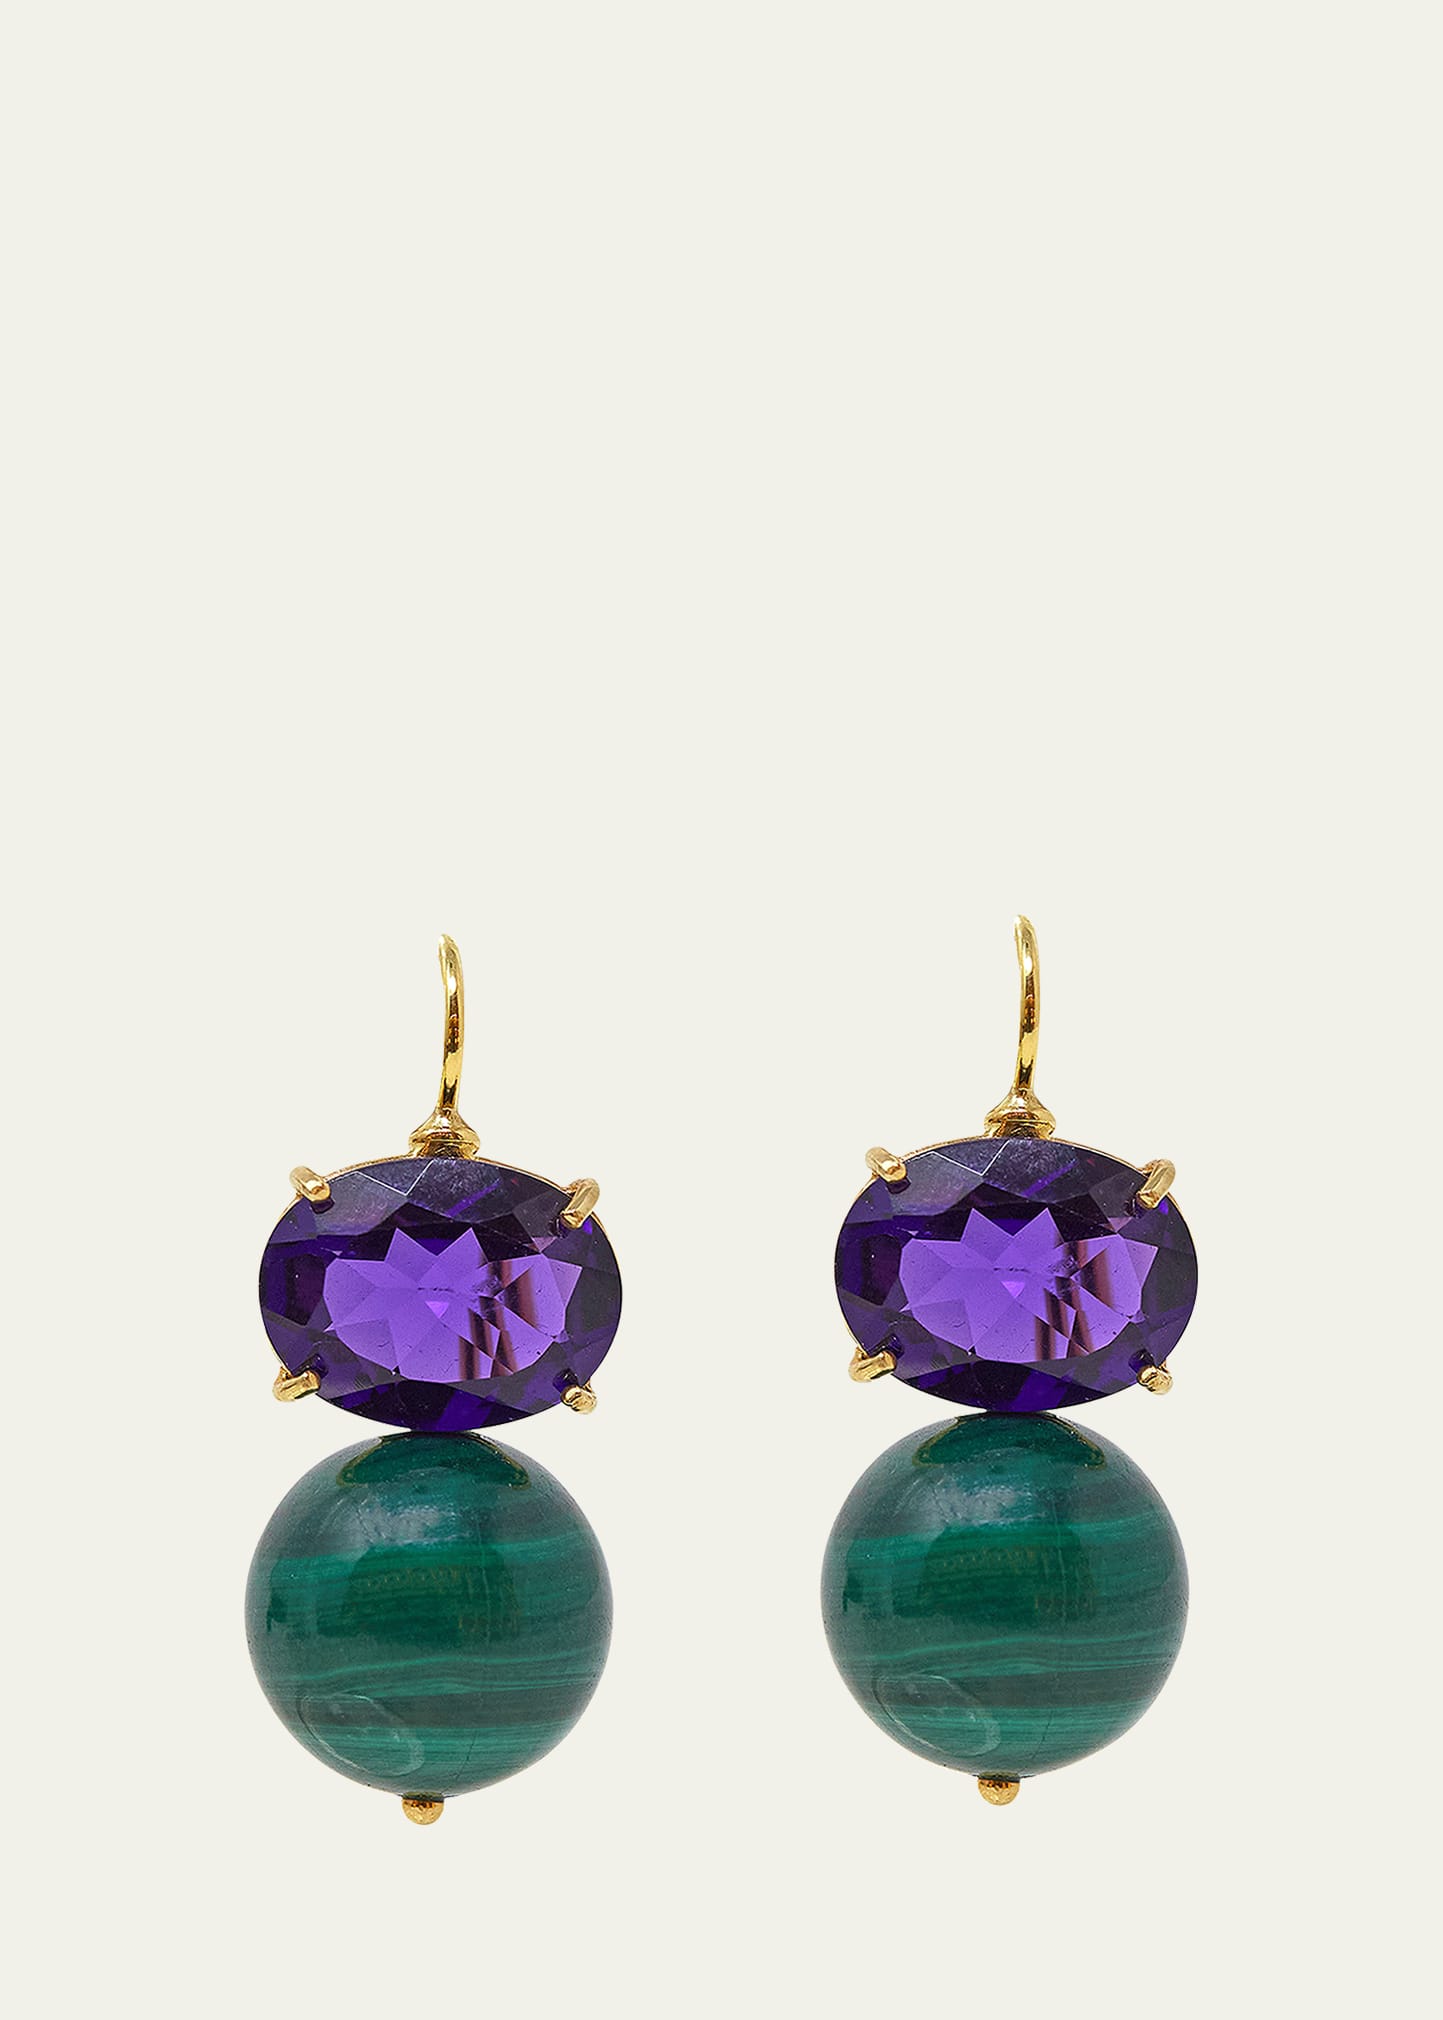 Grazia And Marica Vozza 18K Yellow Gold Hook Earrings with Malachite and Amethyst